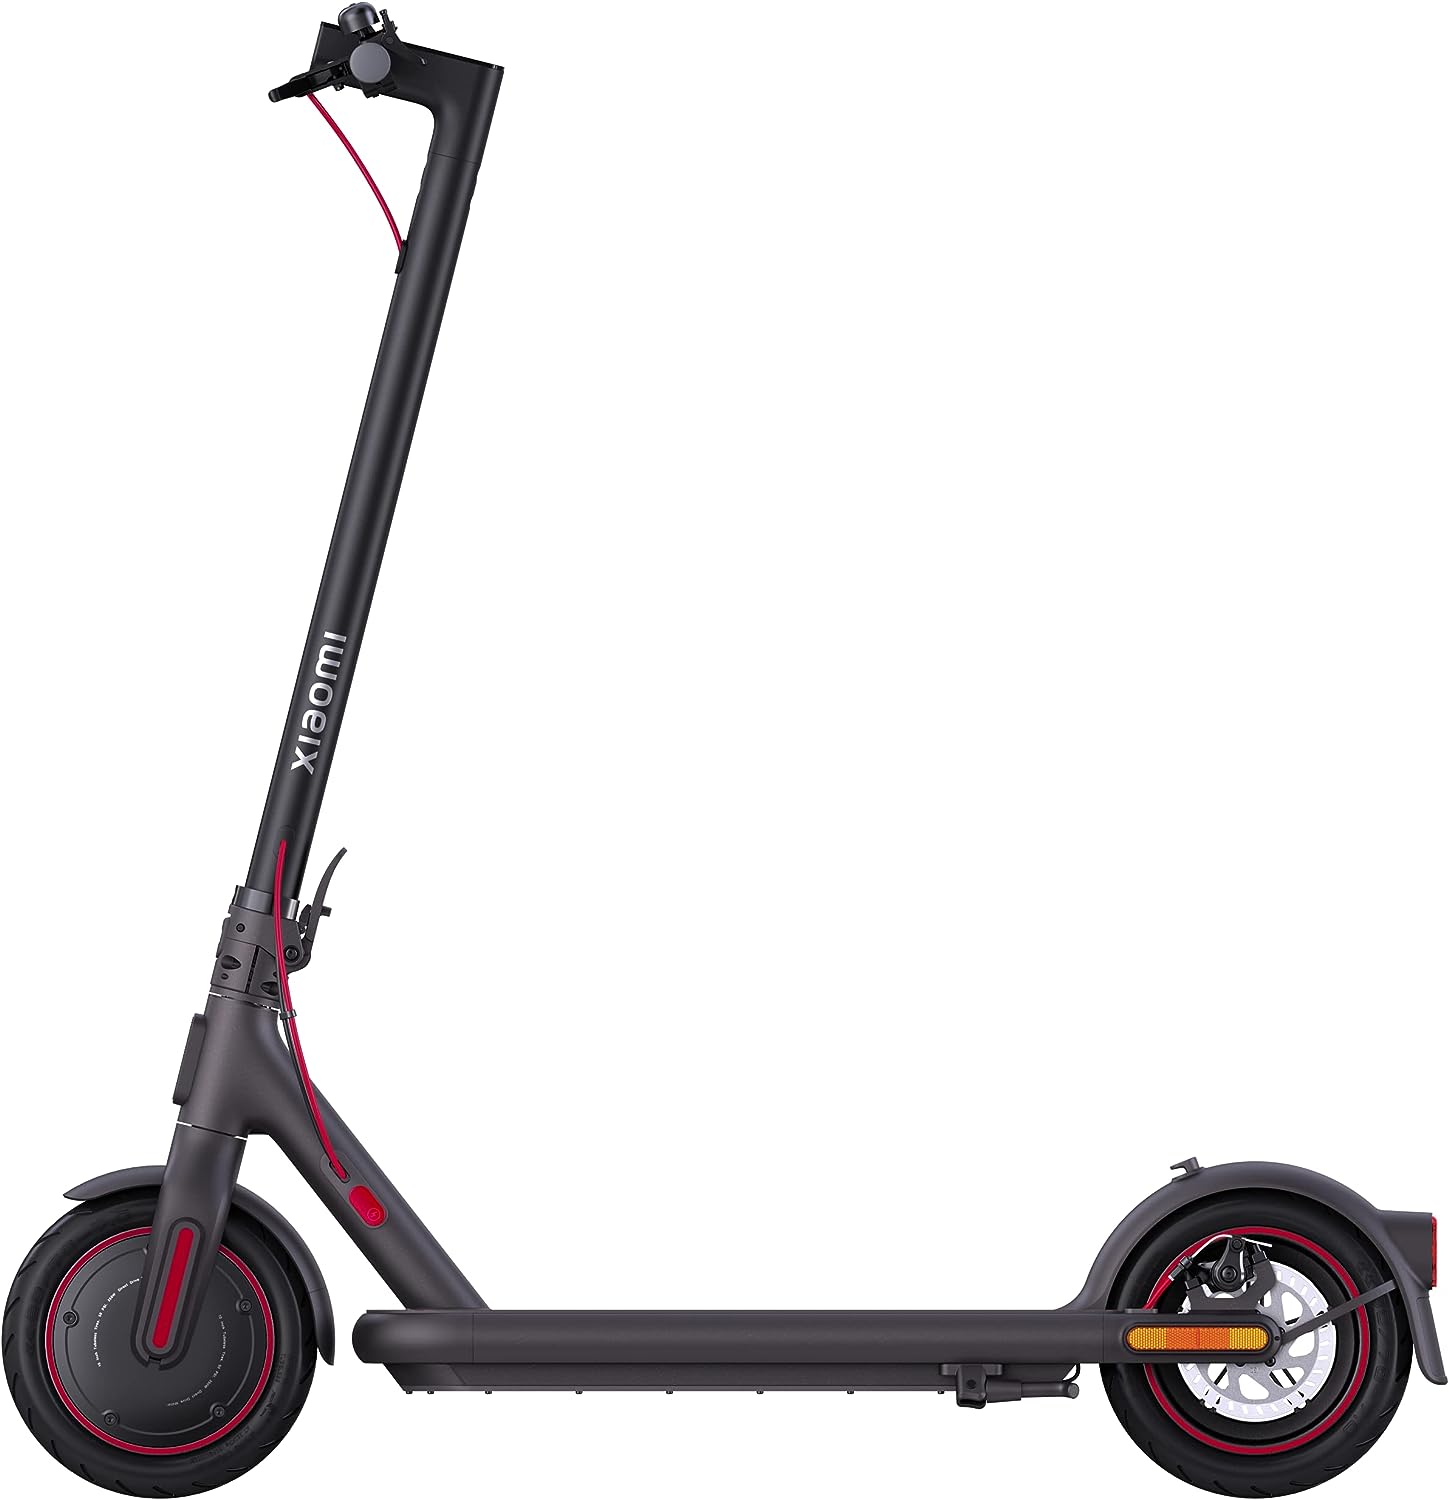 Xiaomi Electric Scooter 4 Pro Black with Dual Braking System up 25 Km/H Maximum Speed | 55km Super long range battery life | 10 inch self-sealing tires